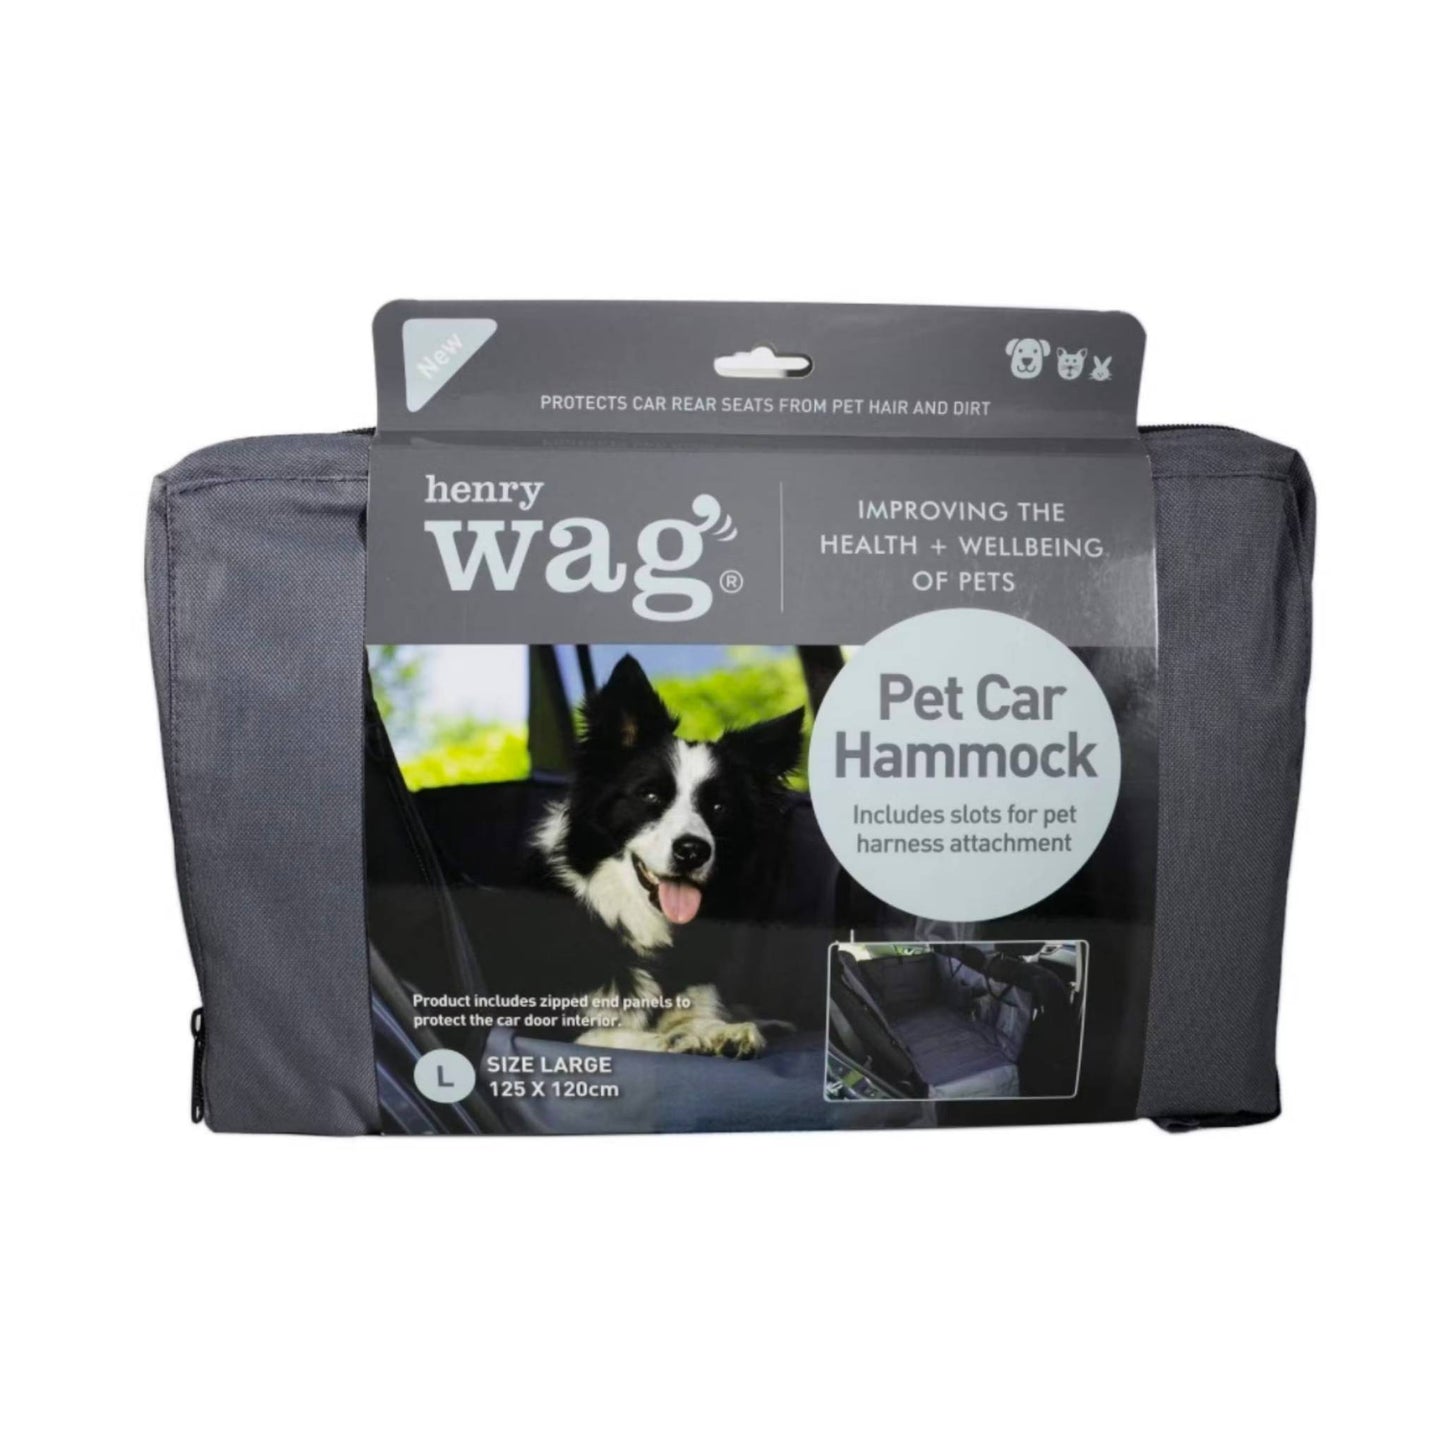 Henry Wag pet car hammock for back seat